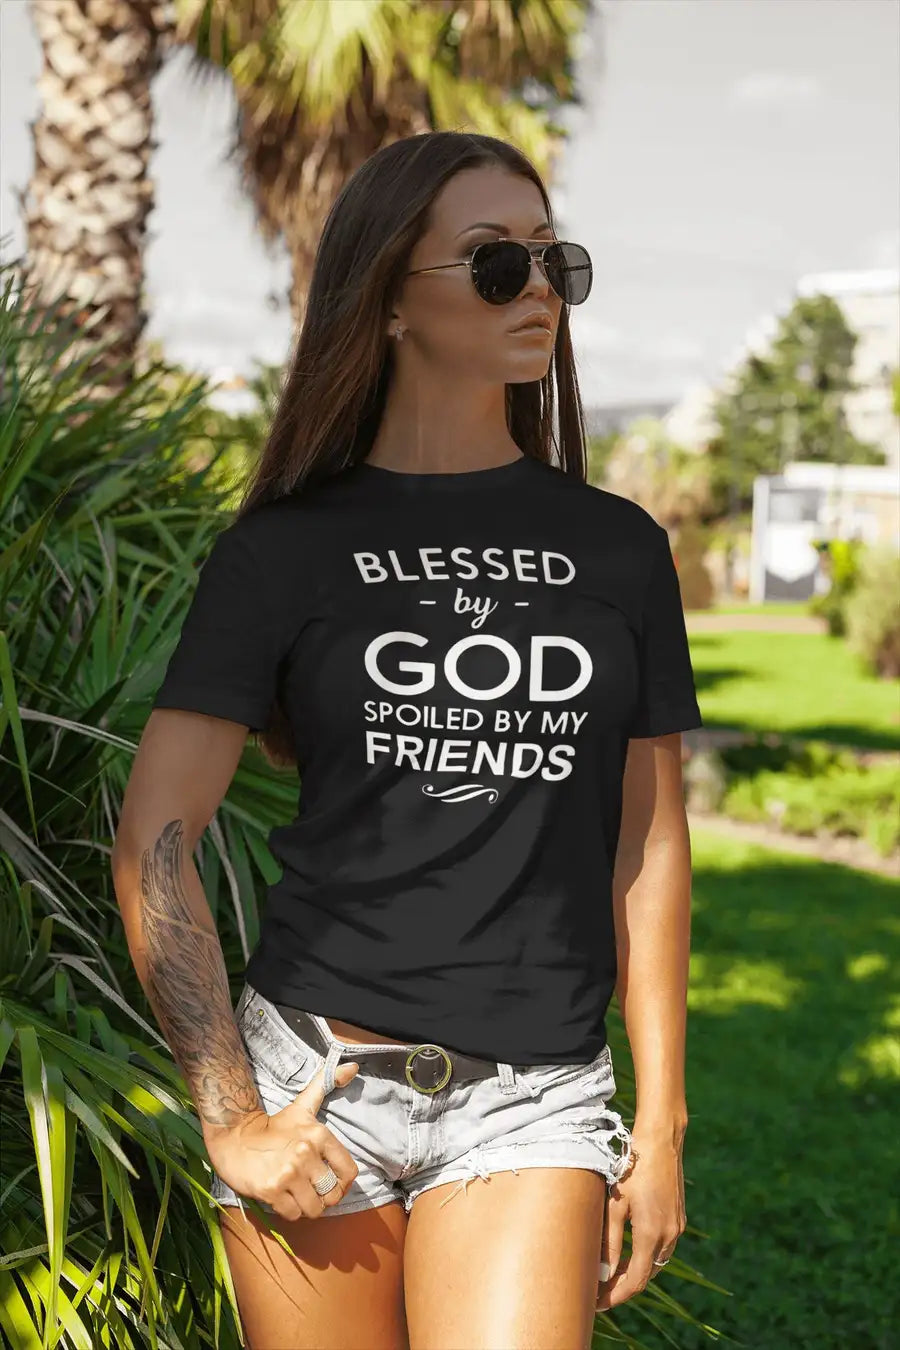 Spoiled By My Friends Special T Shirt for Married Men and Women | Premium Design | Catch My Drift India - Catch My Drift India  black, clothing, couples, female, general, god, husband, made i